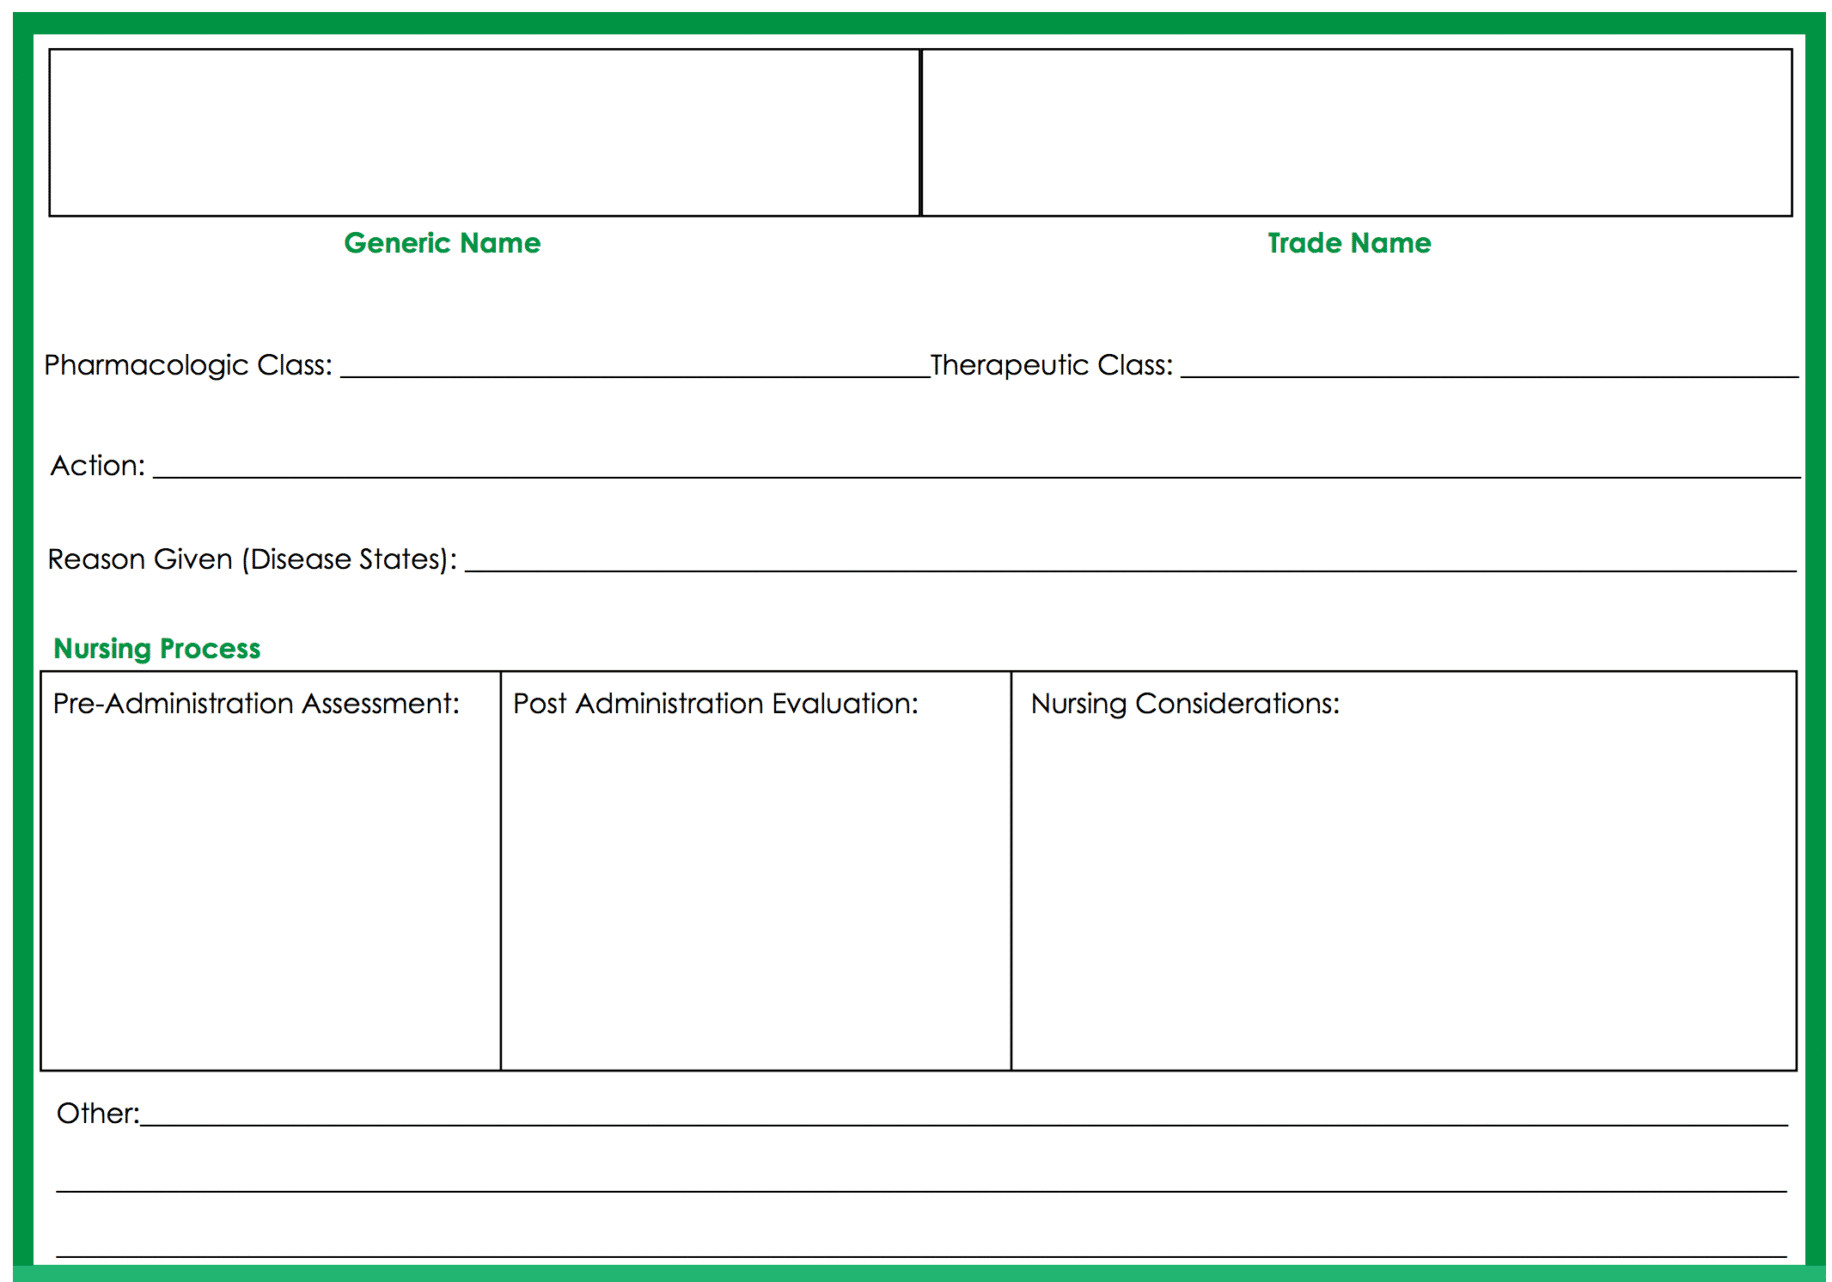 E94D9D Nursing Drug Cards Template | Wiring Resources Pertaining To Medication Card Template